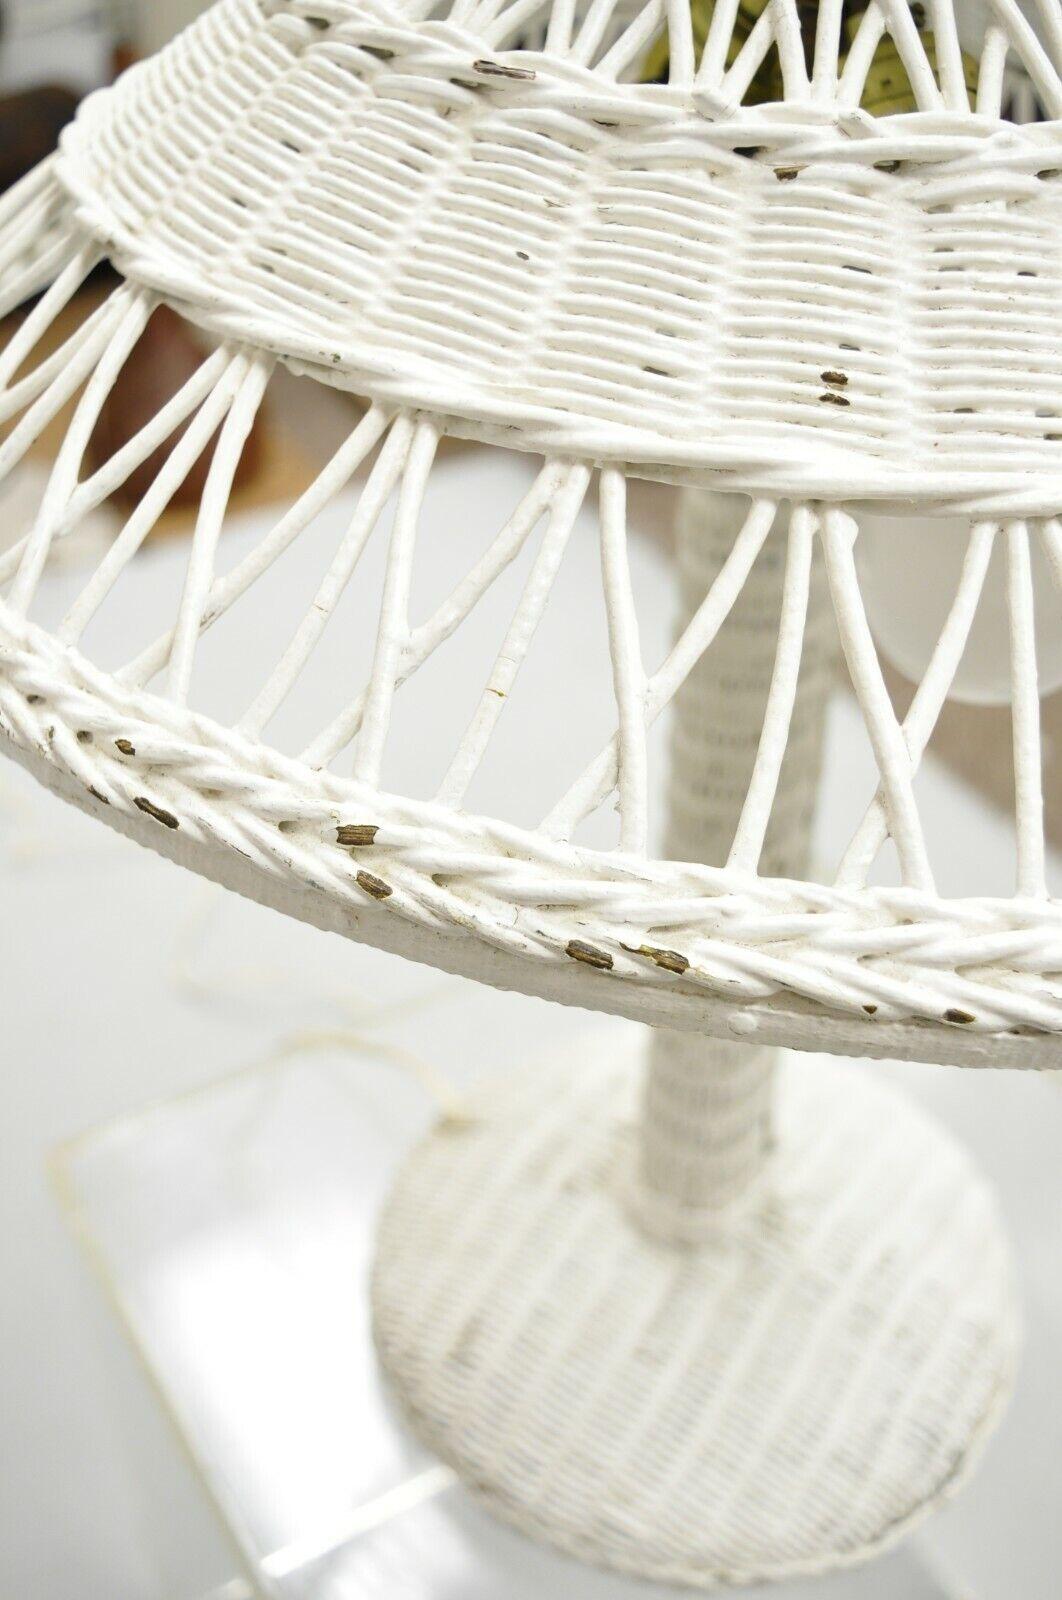 Antique Heywood Wakefield Arts & Crafts White Wicker Table Lamp wth Shade In Good Condition For Sale In Philadelphia, PA